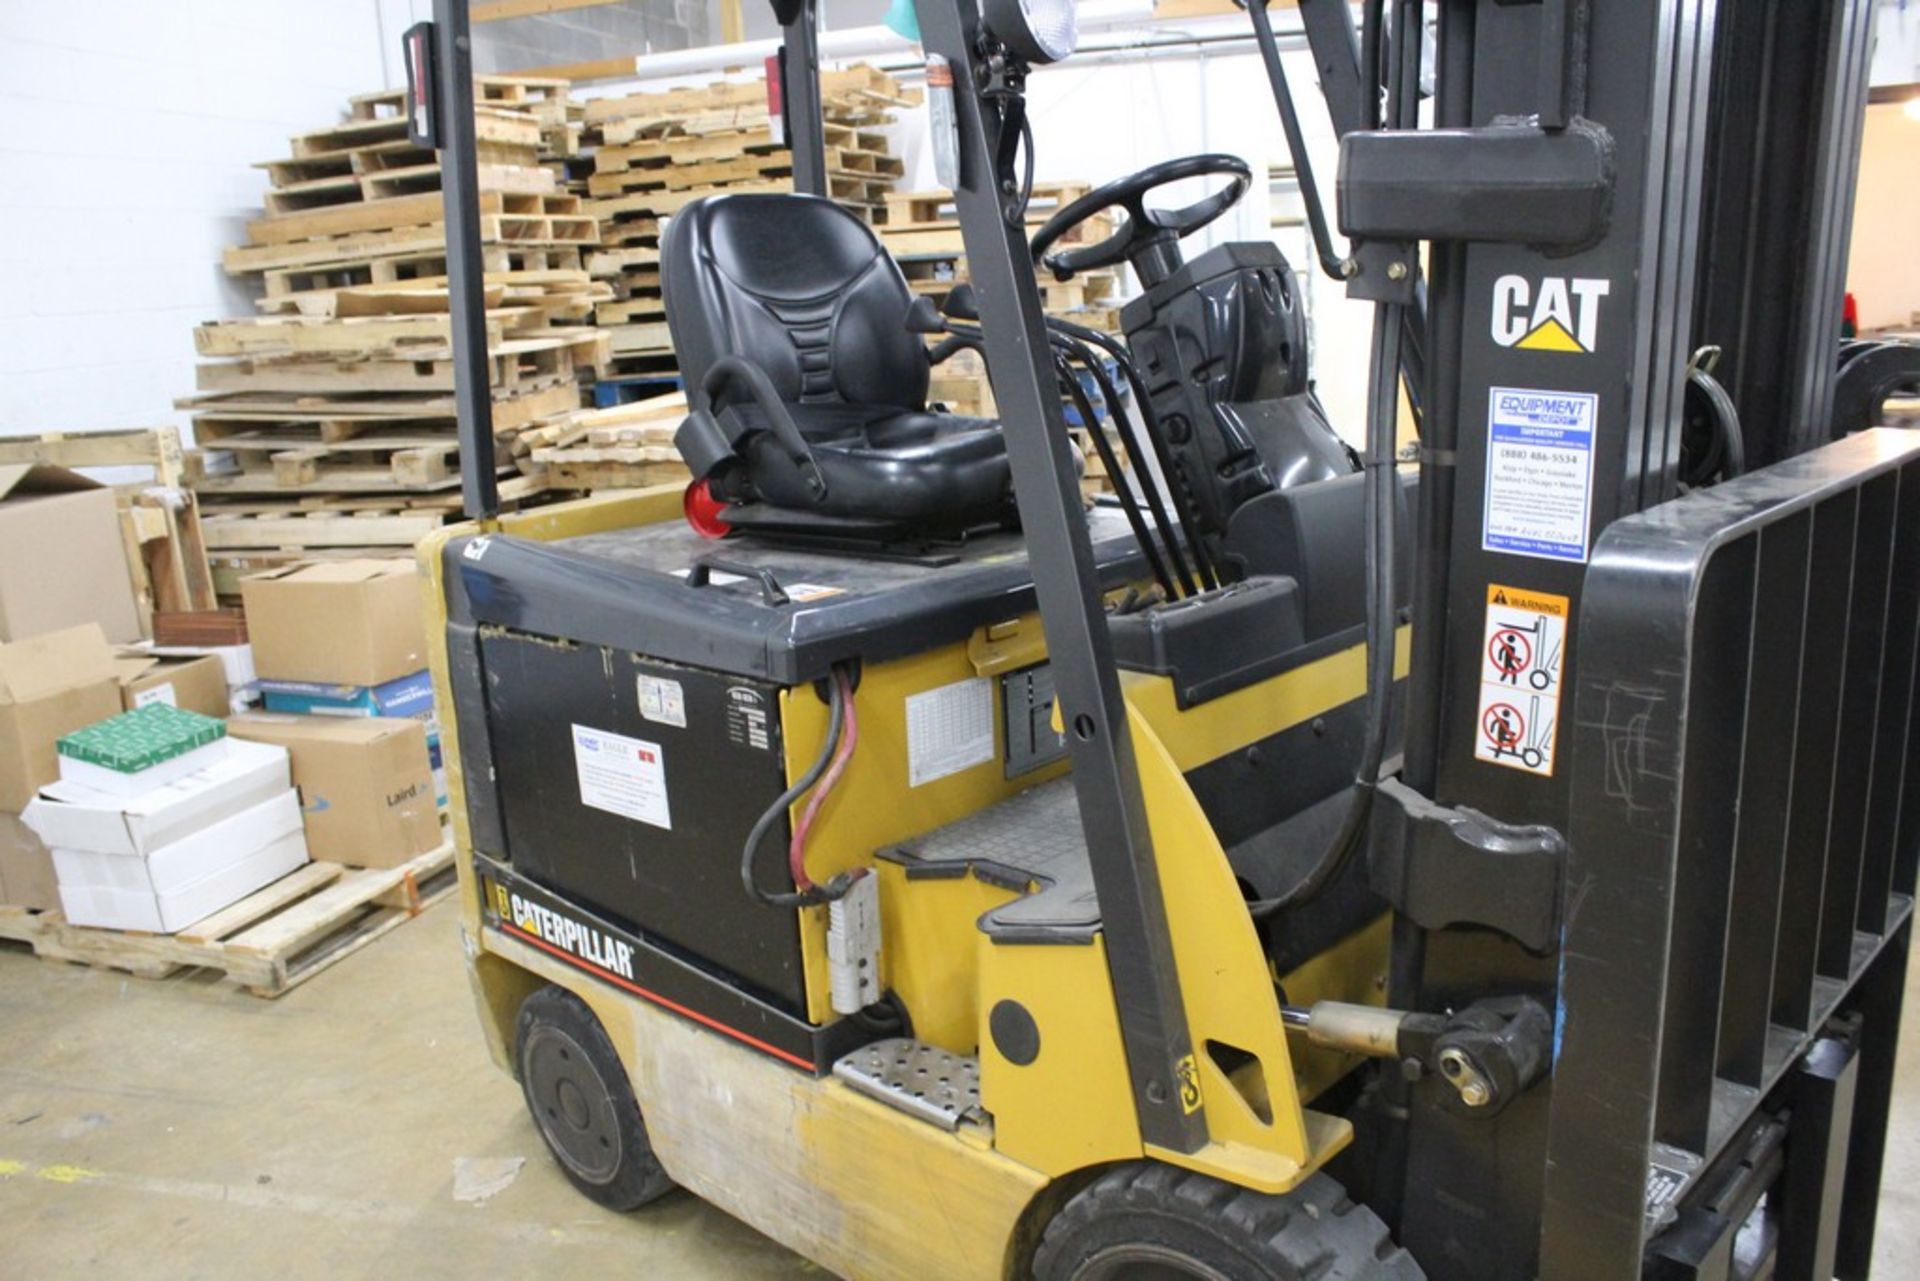 CATERPILLAR MODEL E5000 ELECTRIC FORKLIFT, 3,198 HOURS ON METER, LIFTING CAP. 4,500 LBS., 188" MAX - Image 7 of 12